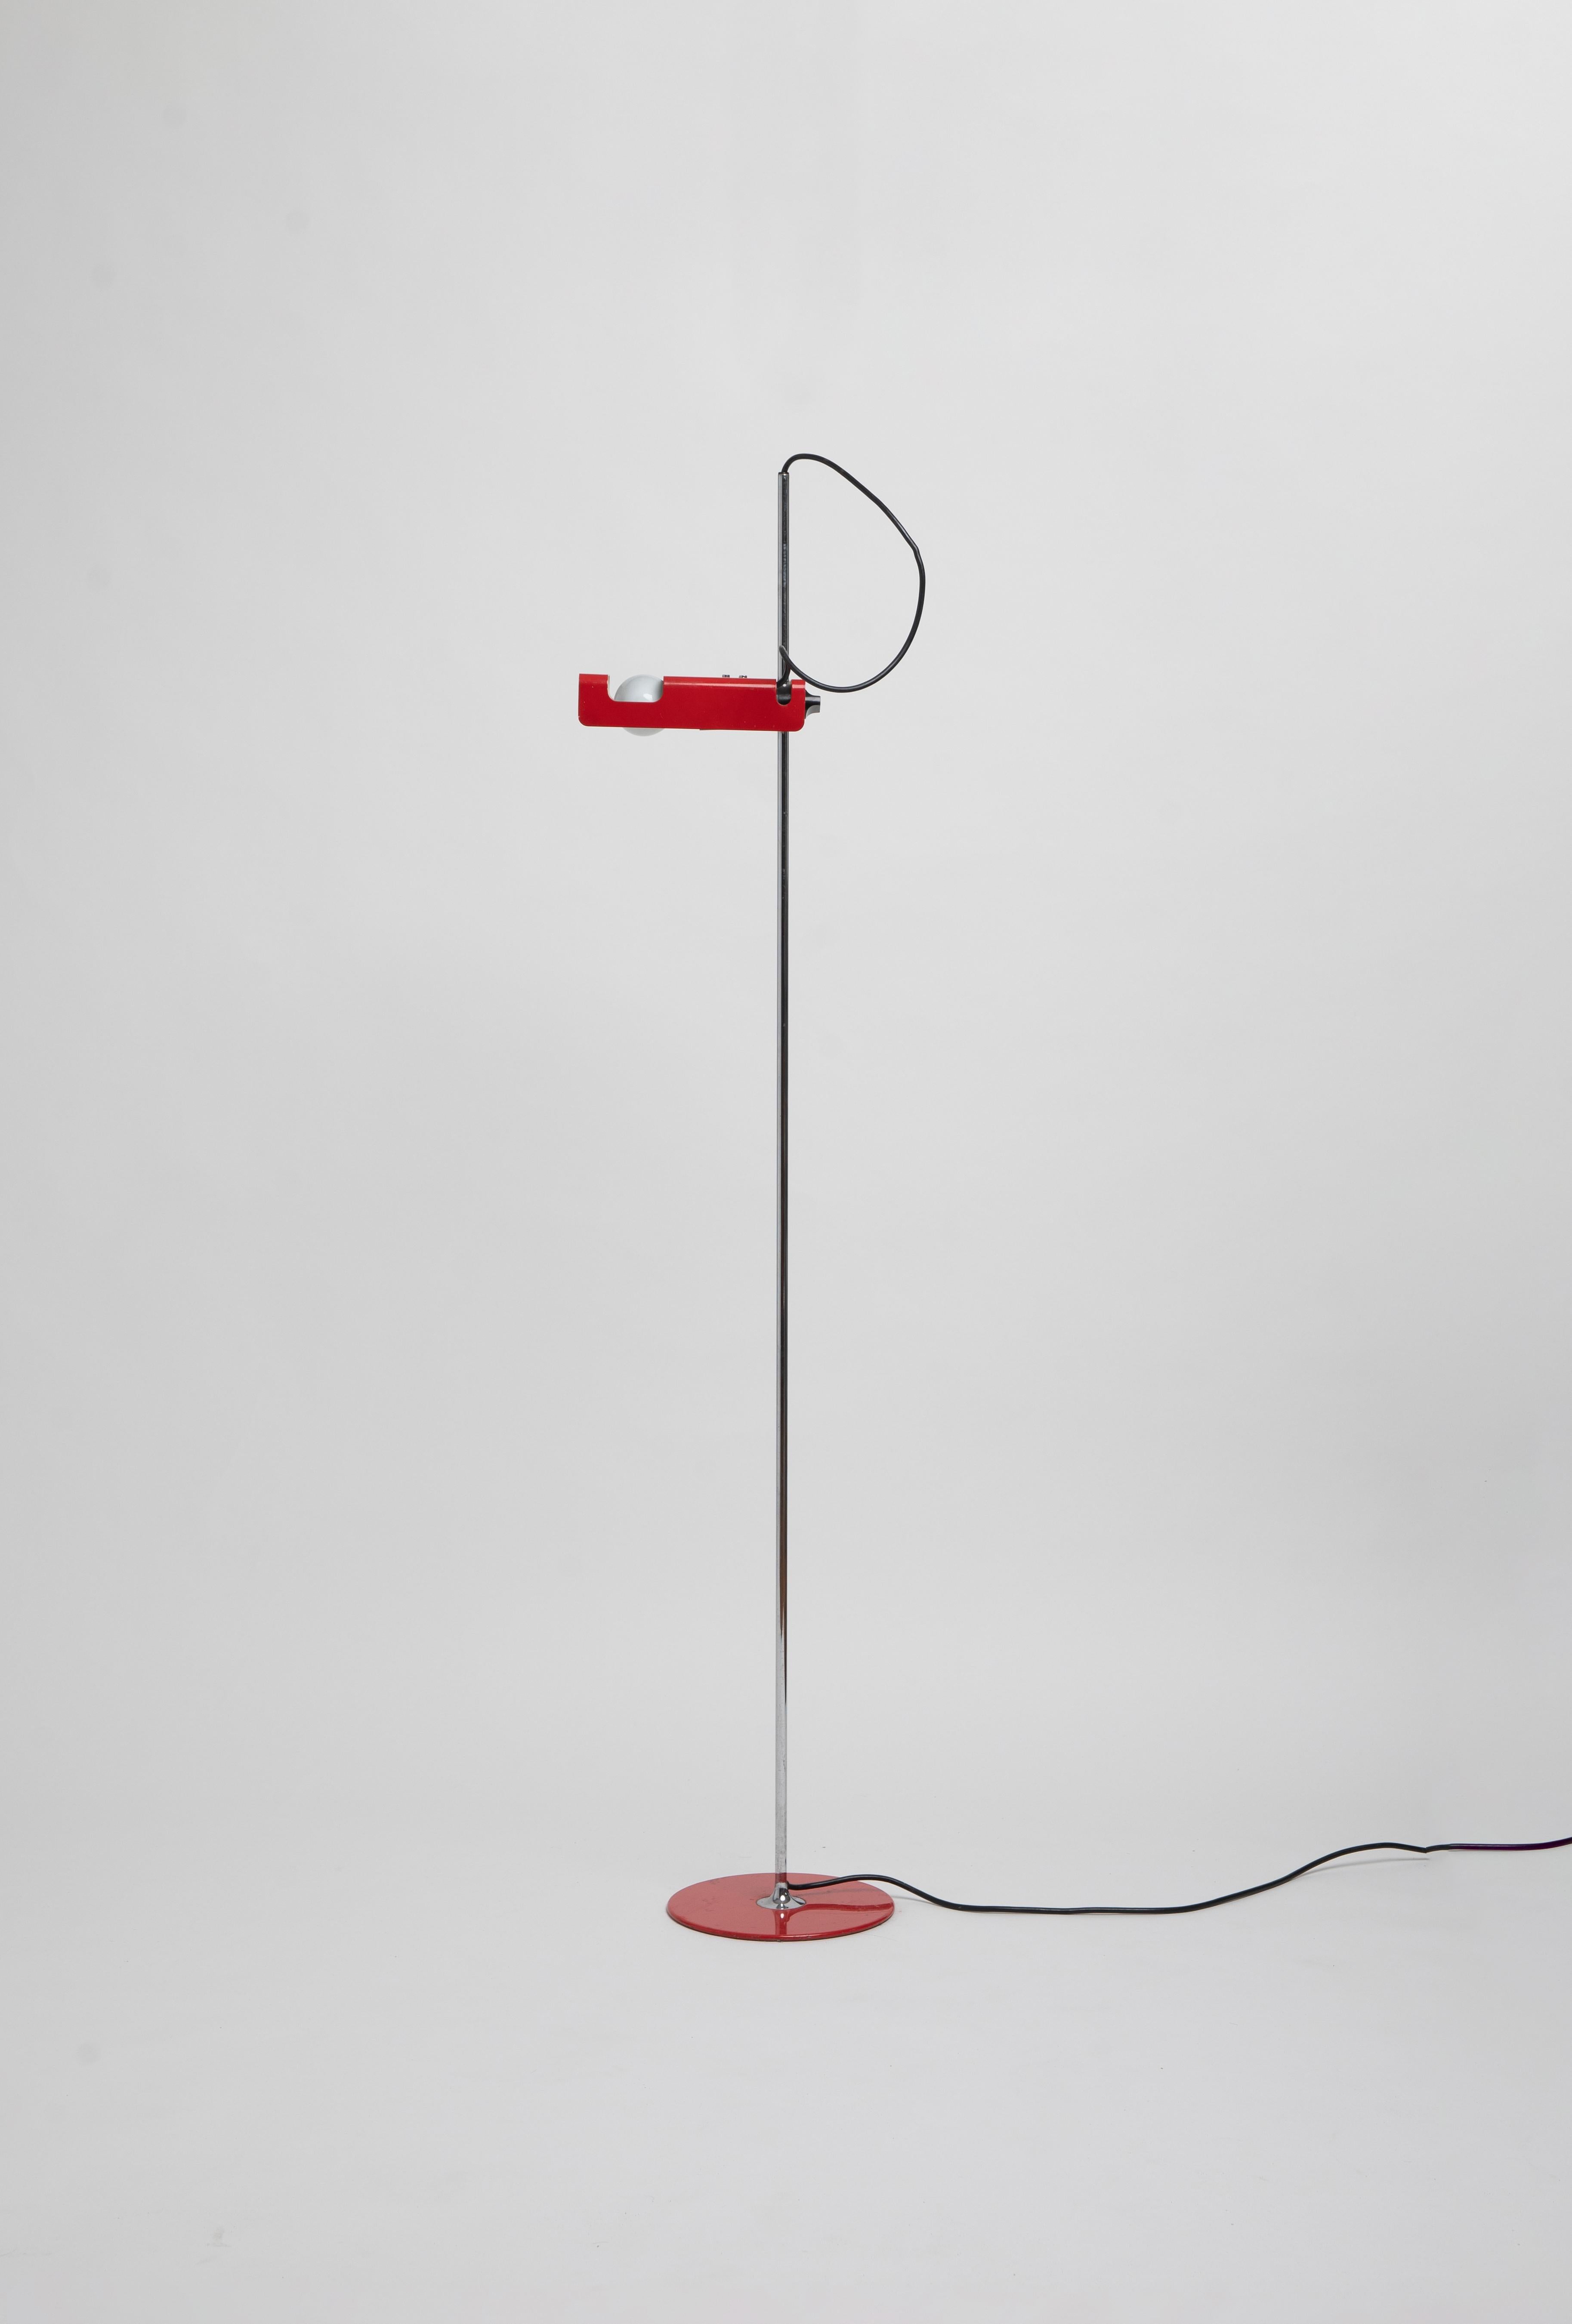 With a lacquered metal base, chromium-plated stem, and adjustable reflector in lacquered aluminium, renowned designer Joe Colombo’s Spider Lamp was made to withstand time with its durability and simple composition. 

Modelled to take a distinct